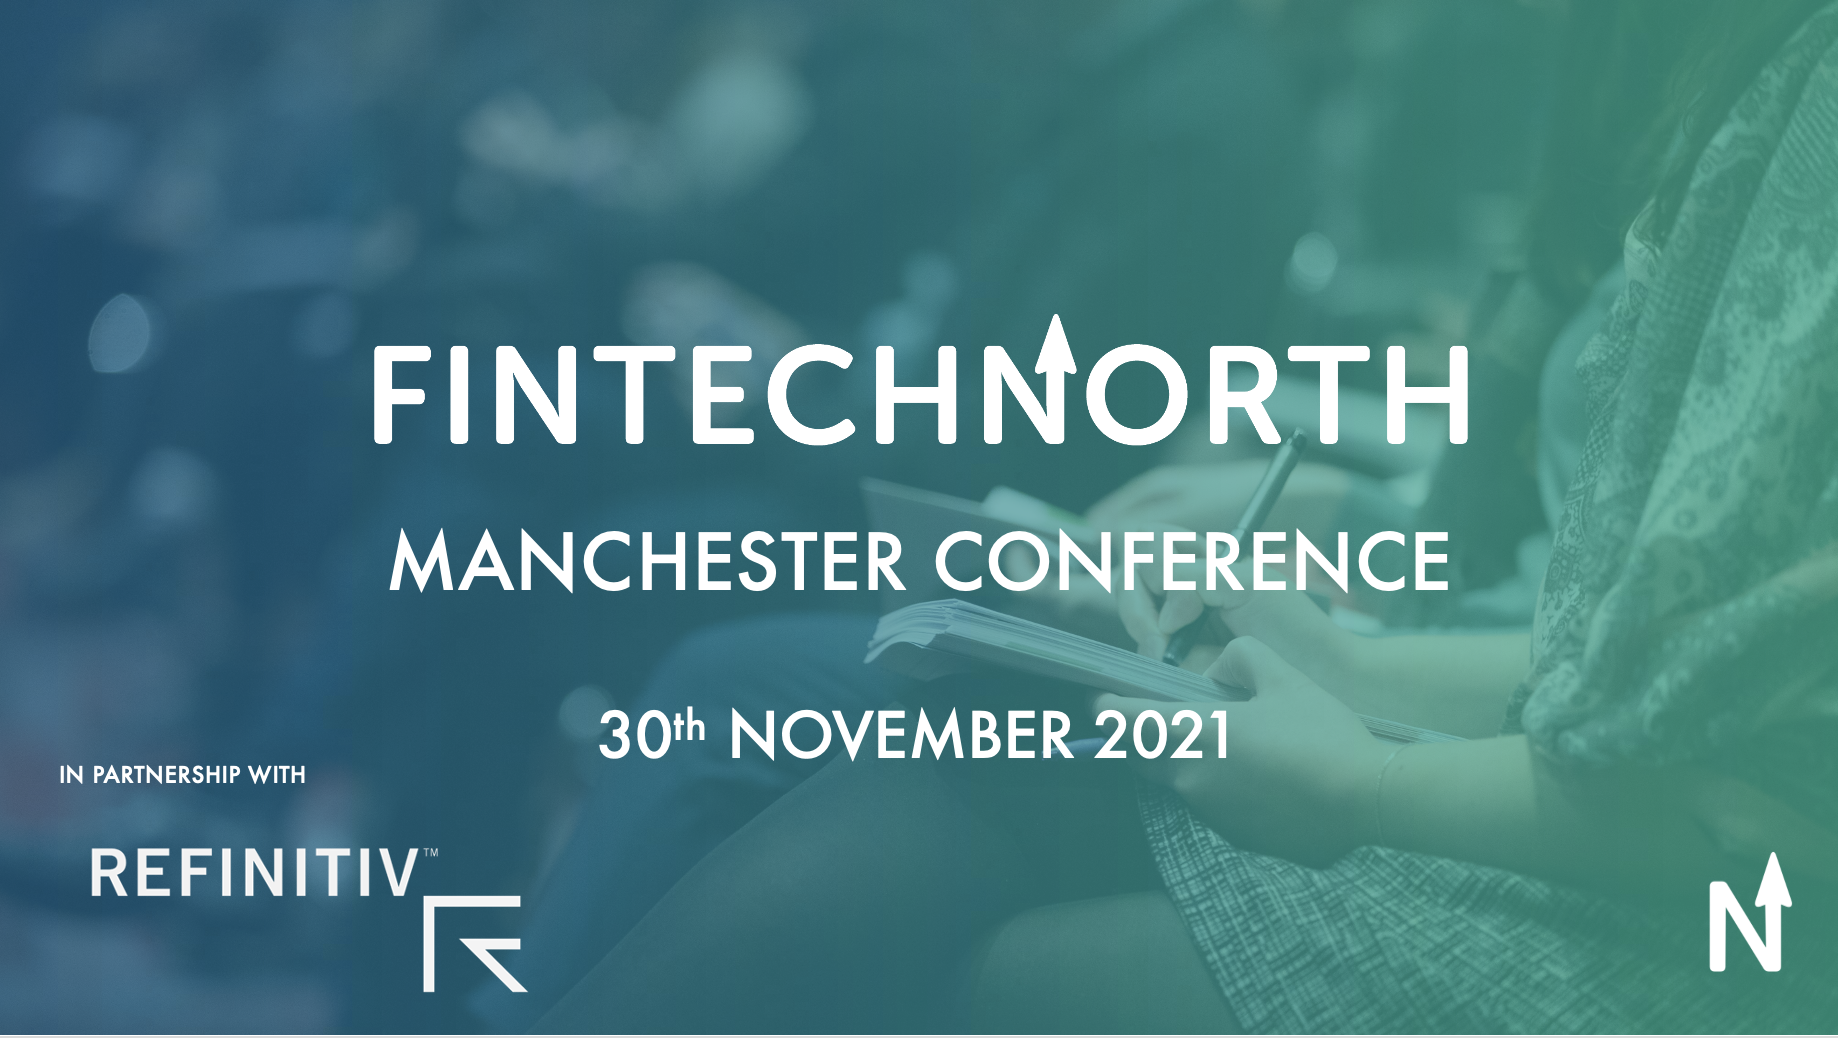 FinTech North returns to face-to-face events for 4th annual Manchester Conference, FCA confirmed as speakers